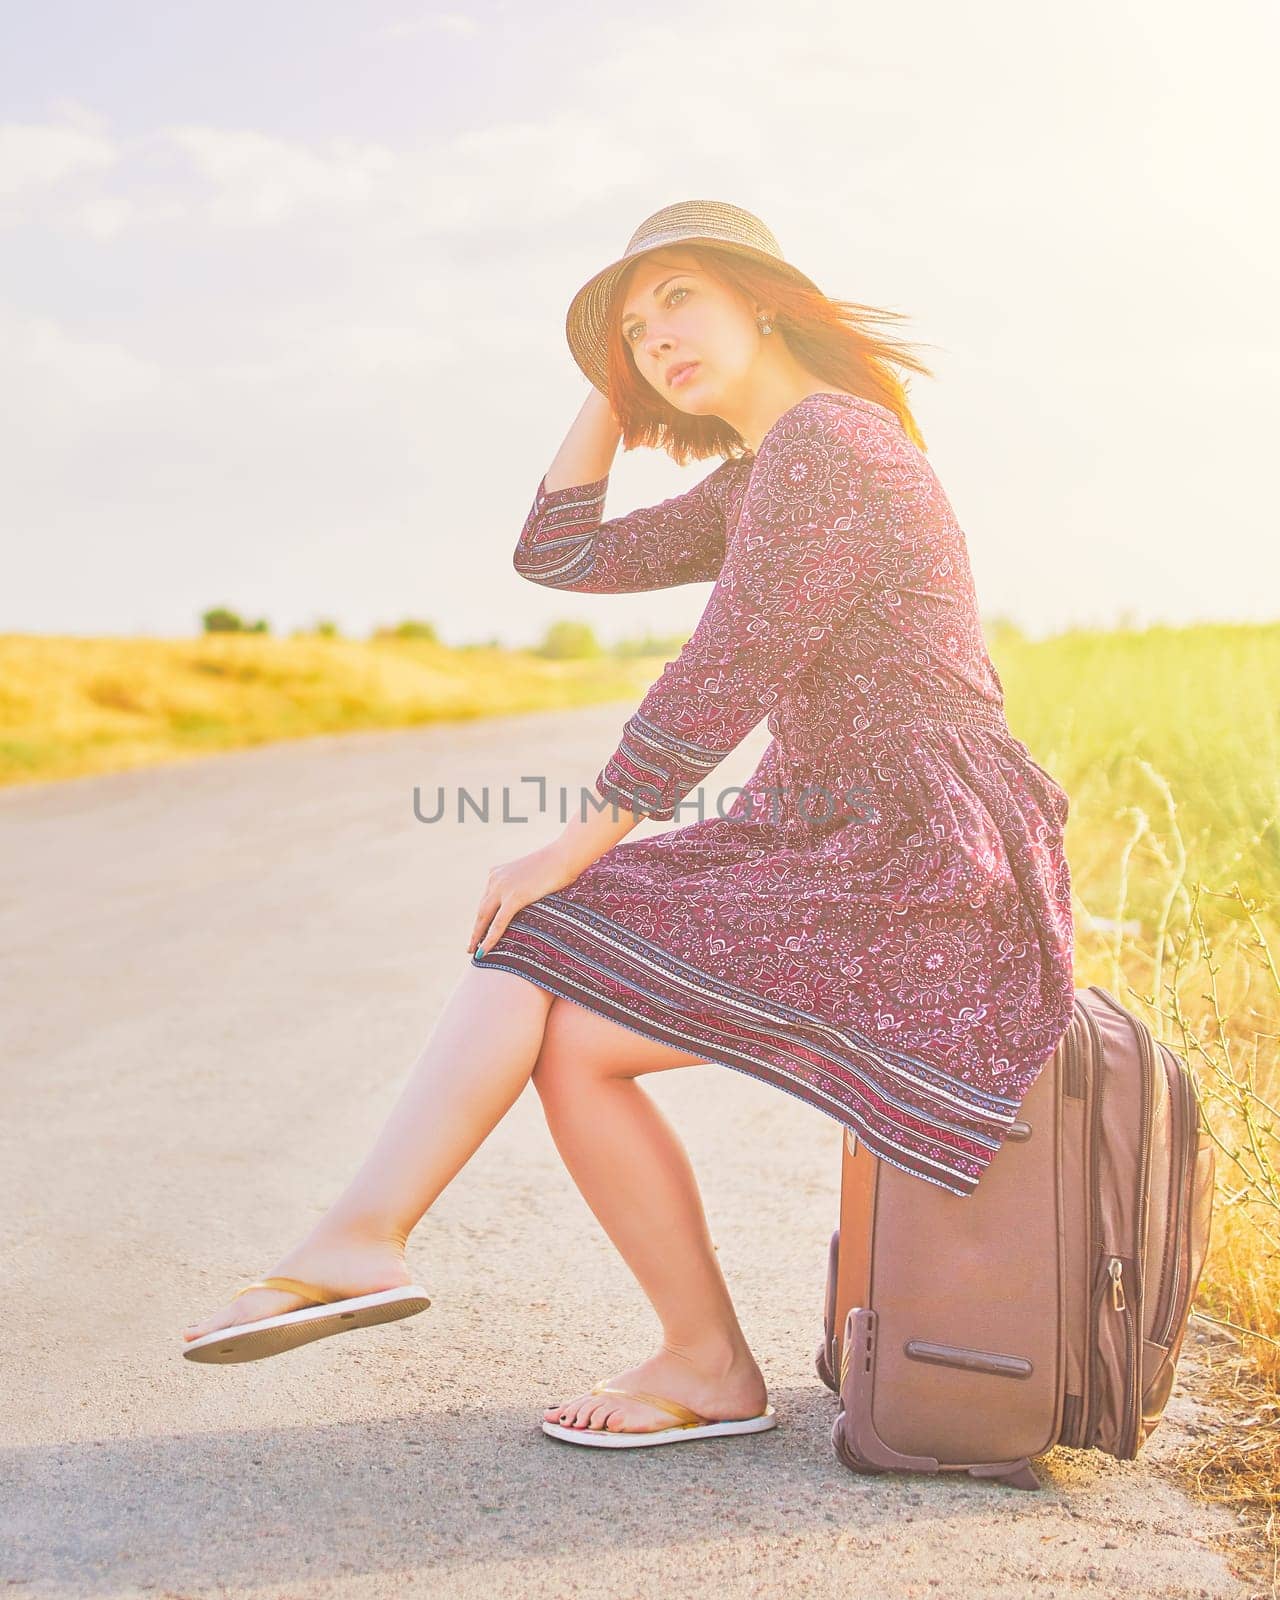 Amazing woman in summer dress and hat hitchhiking with suitcase on the road. Cute female sitting on Luggage waiting for car. Trip concept